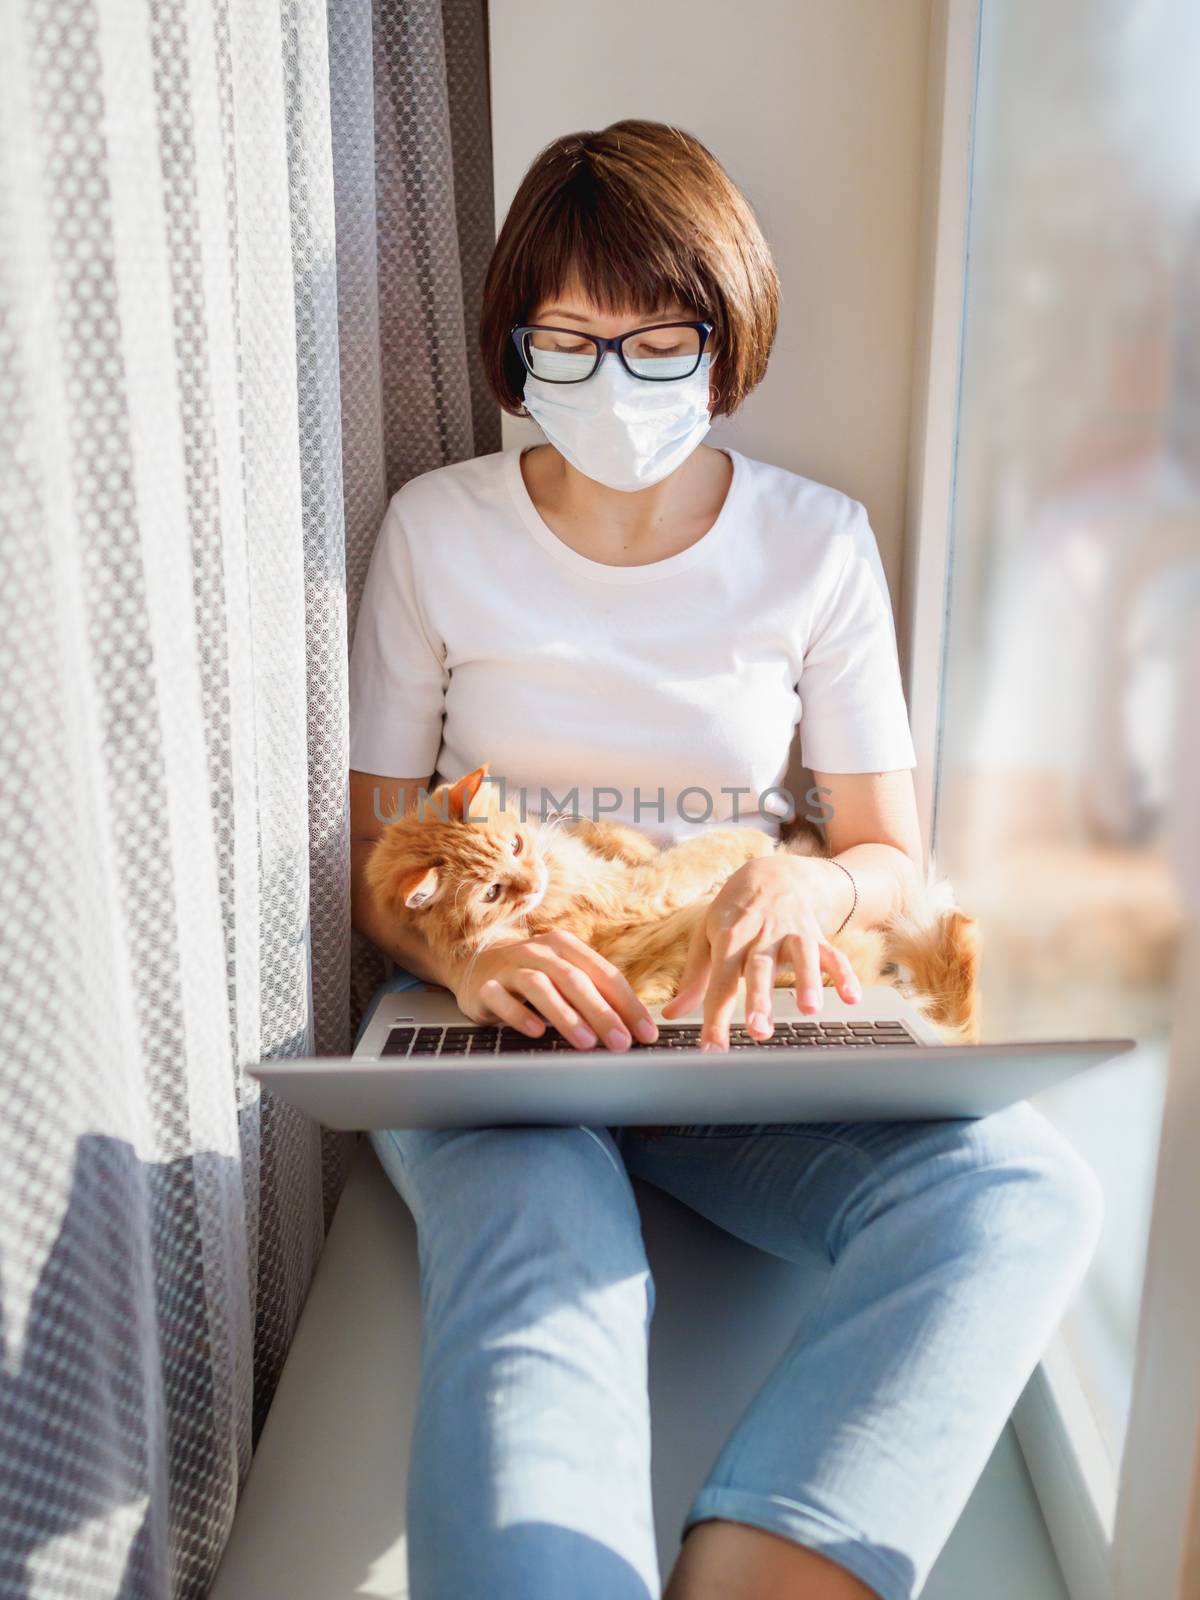 Woman in medical mask remote works from home. She sits on window sill with laptop and cute ginger cat on her knees. Lockdown quarantine because of coronavirus COVID19. Self isolation at home.